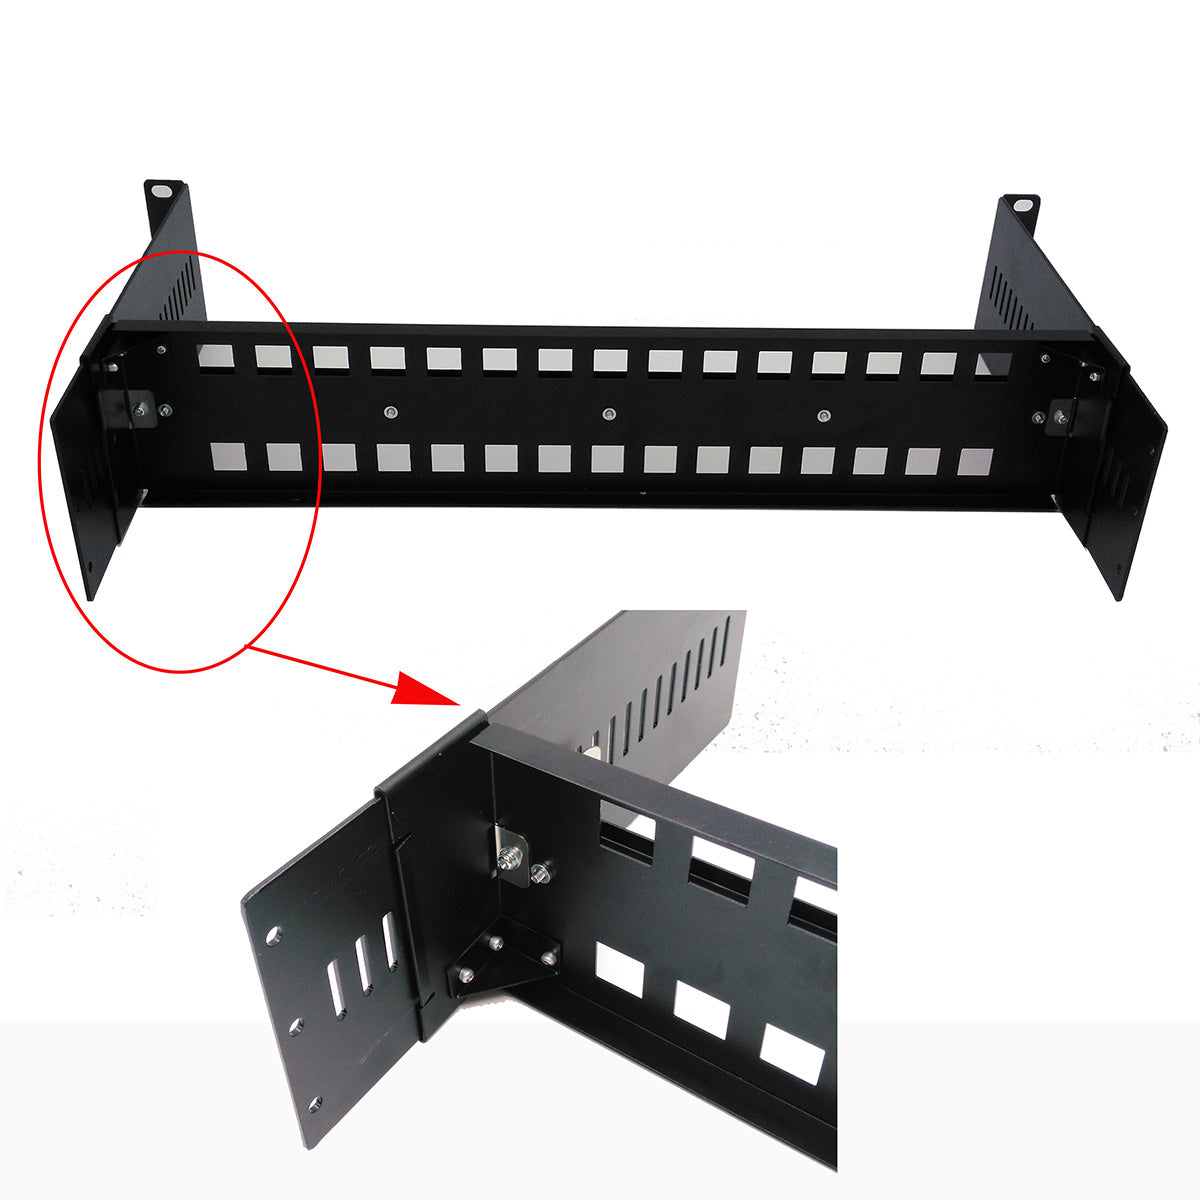 19 Inches Adjustable Rack Mount DIN Rail Bracket for Media Converters Ethernet Switch Industrial PoE Switch with Light and High Strength Aluminum Alloy Material